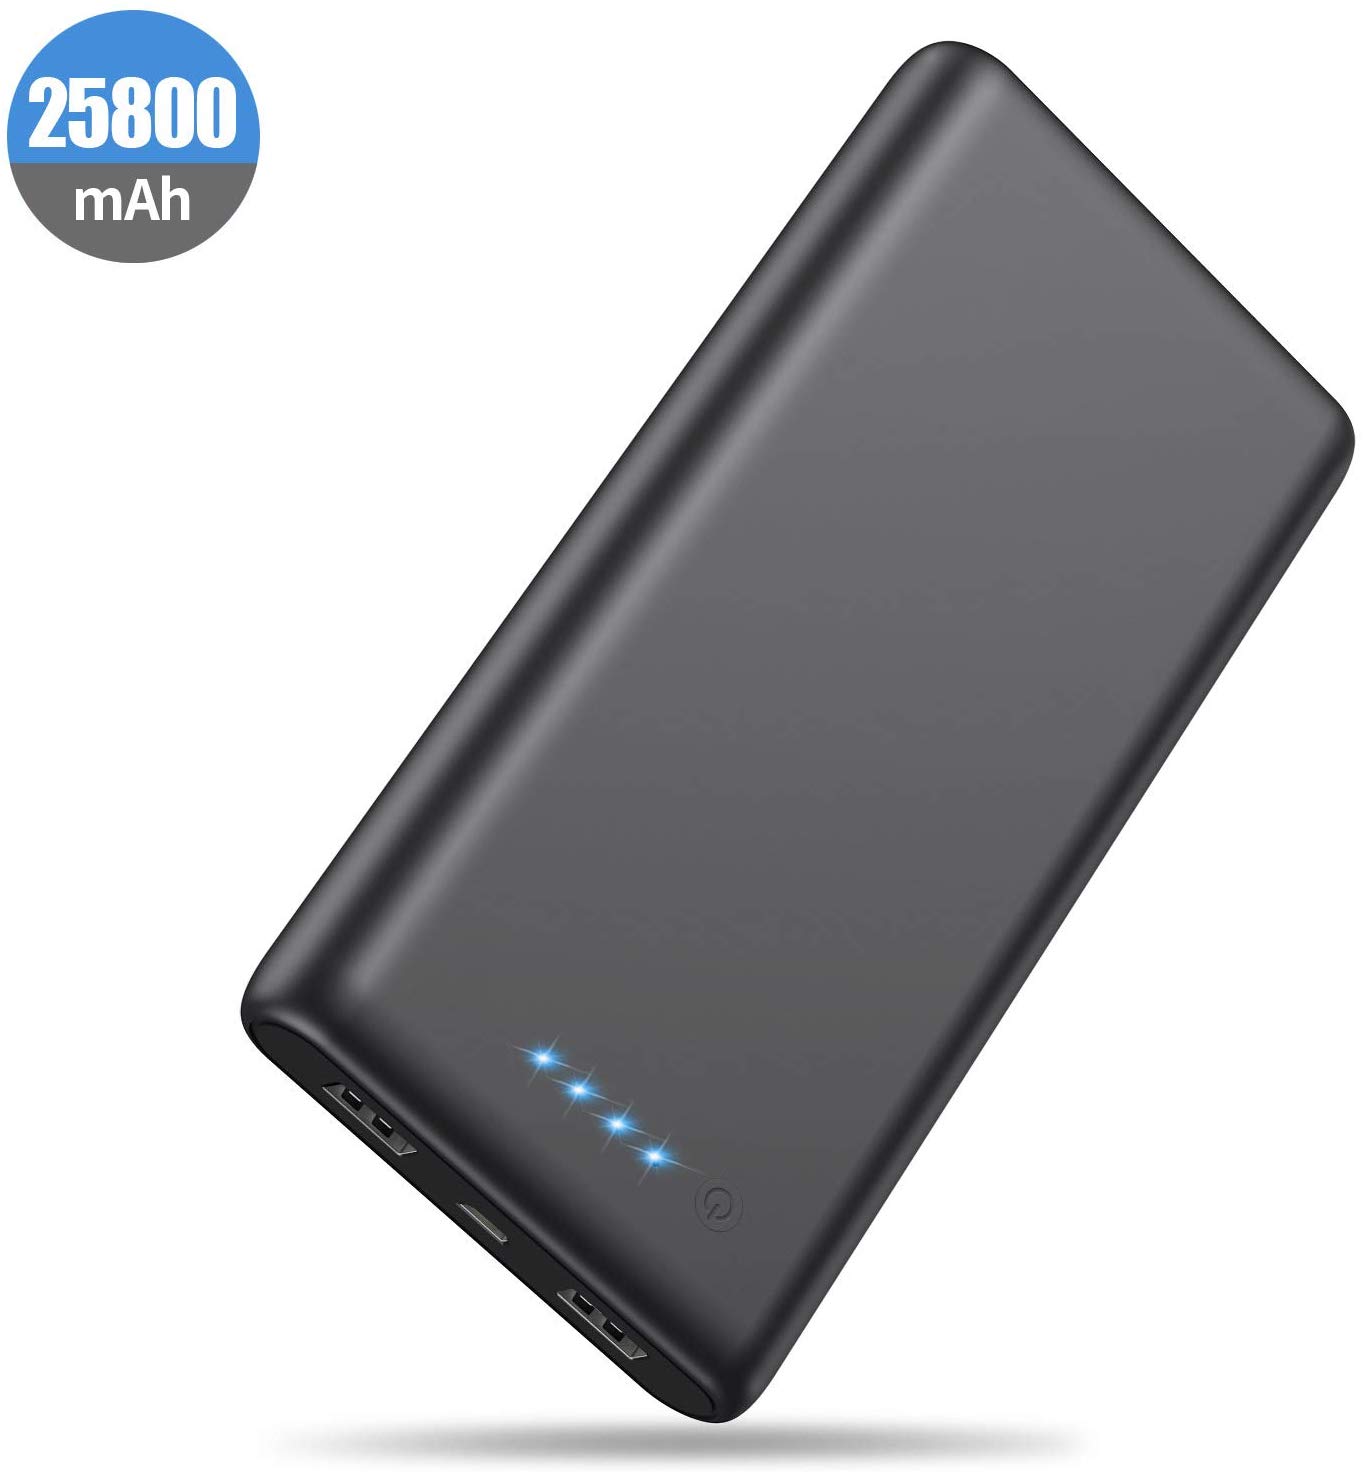 Power Bank, Portable Charger